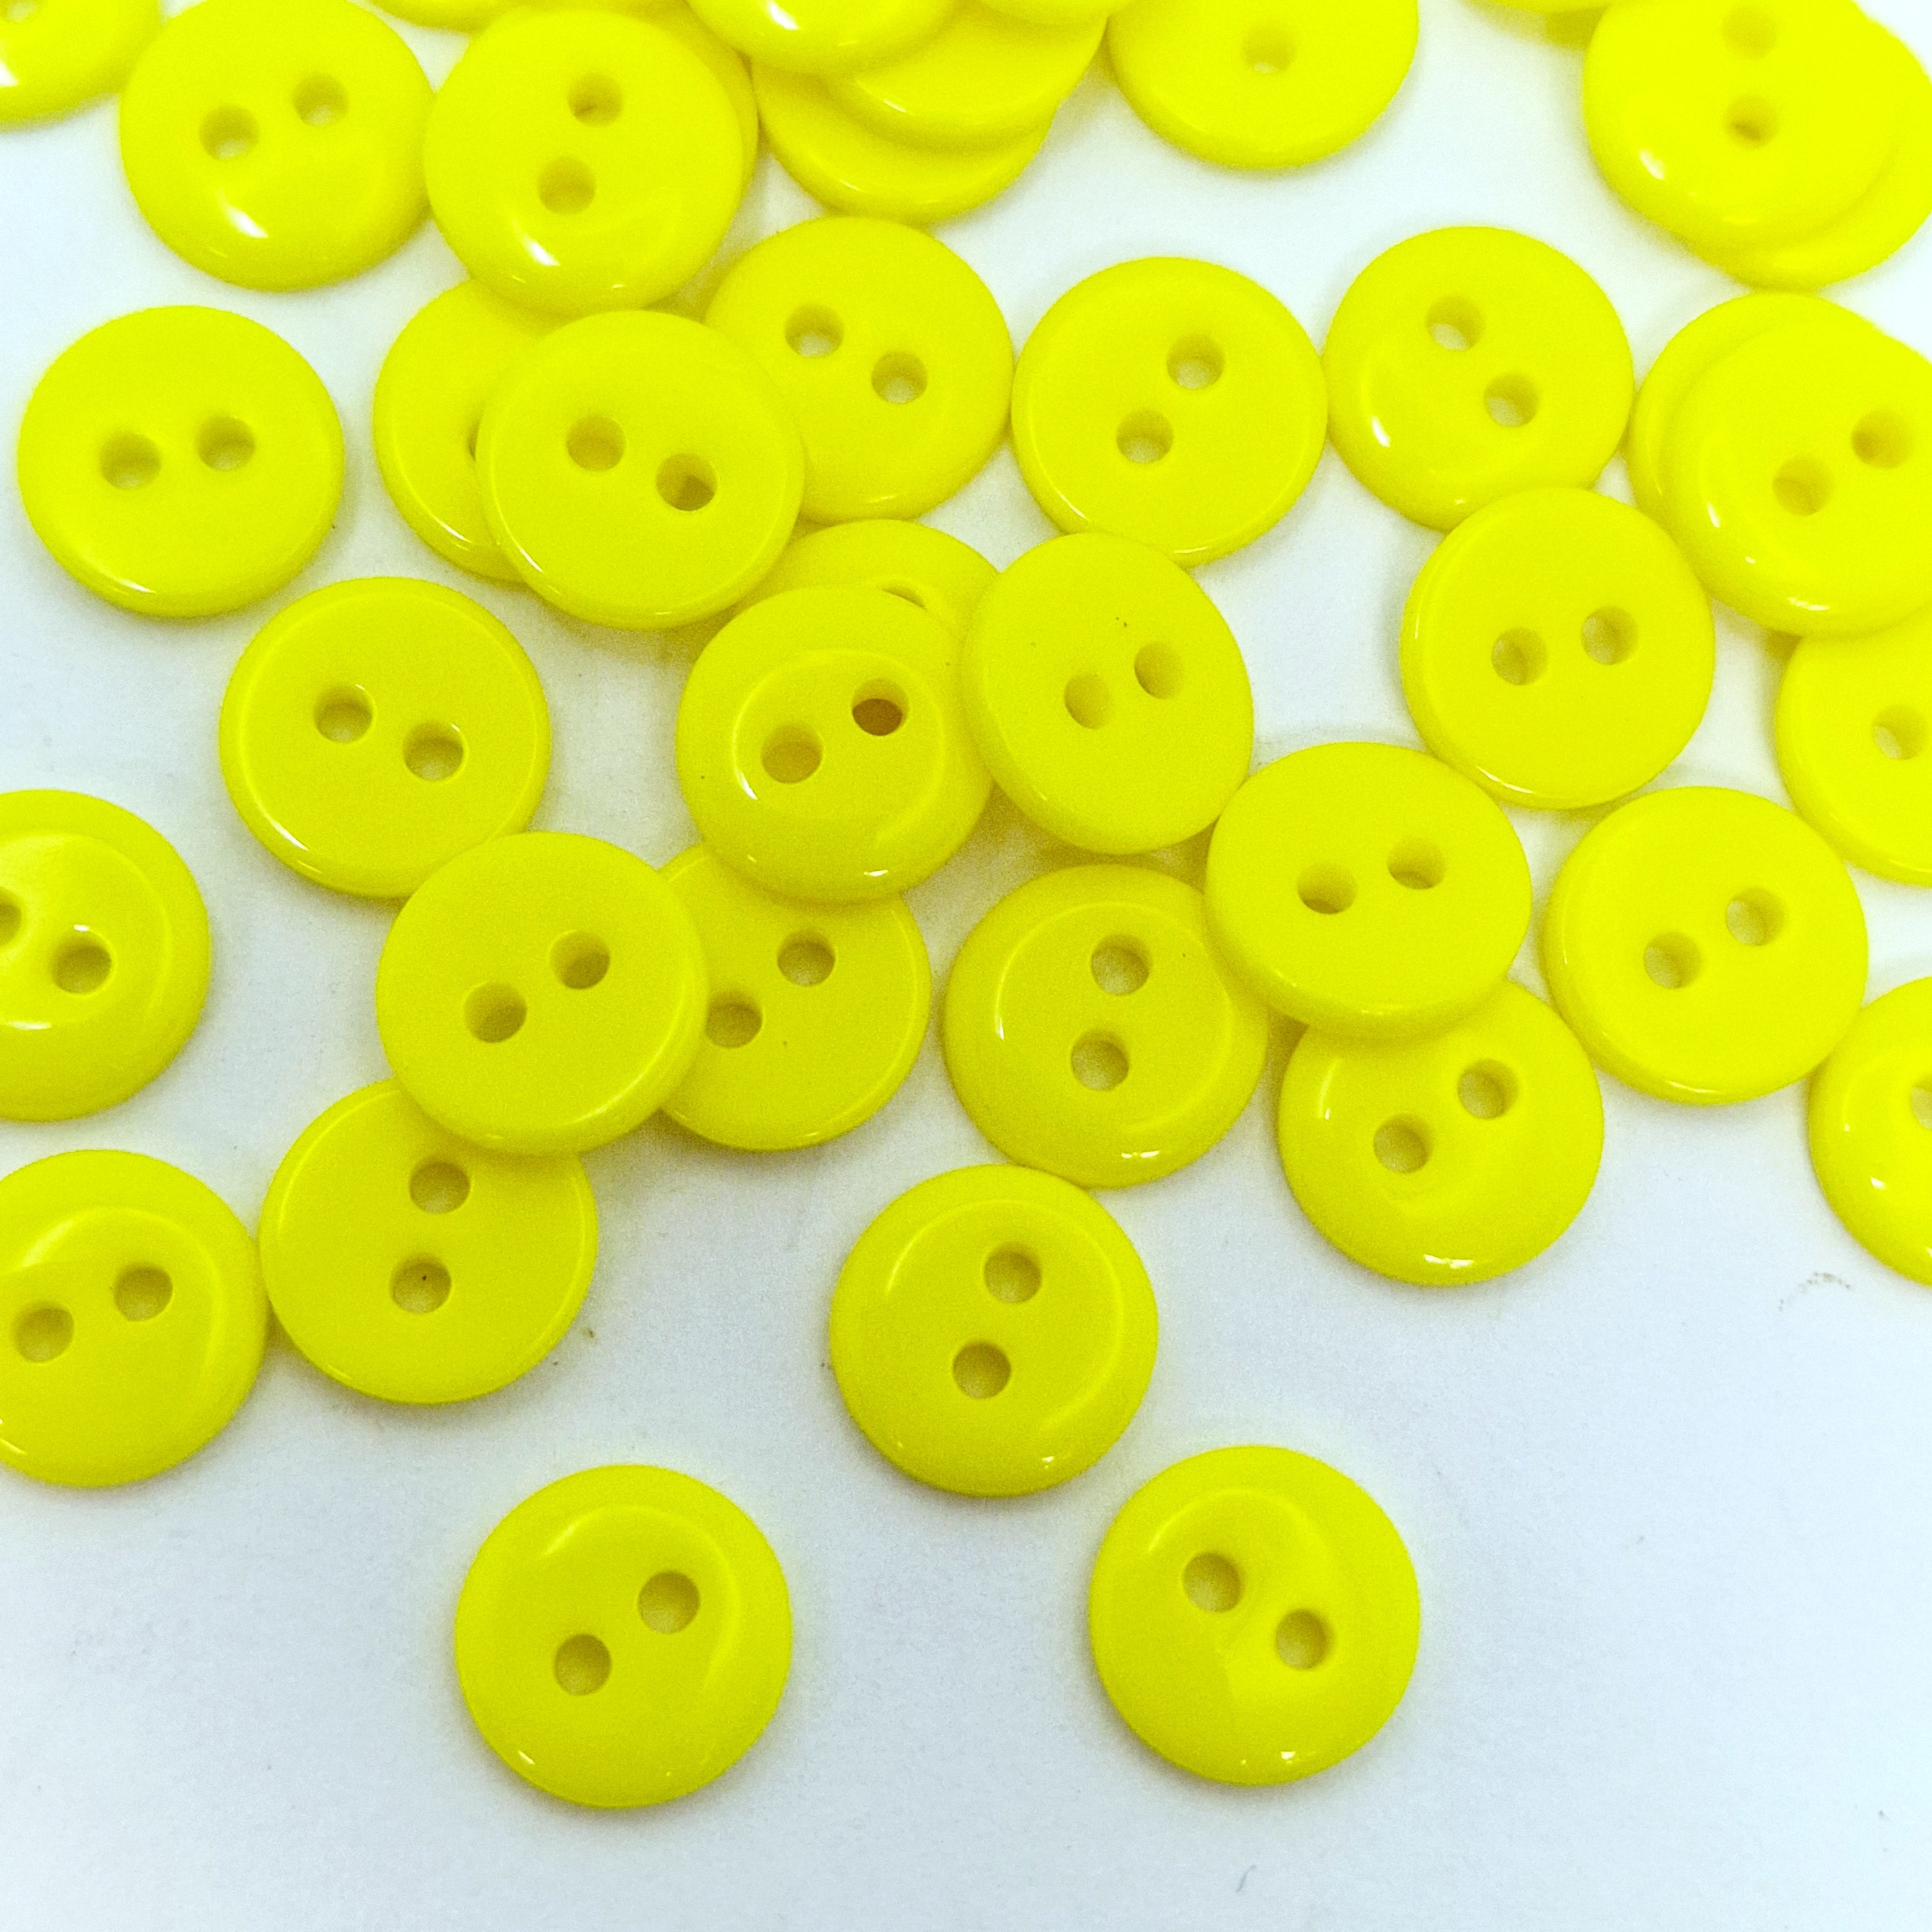 MajorCrafts 120pcs 9mm Sunshine Yellow Small 2 Holes Round Resin Sewing Buttons B08